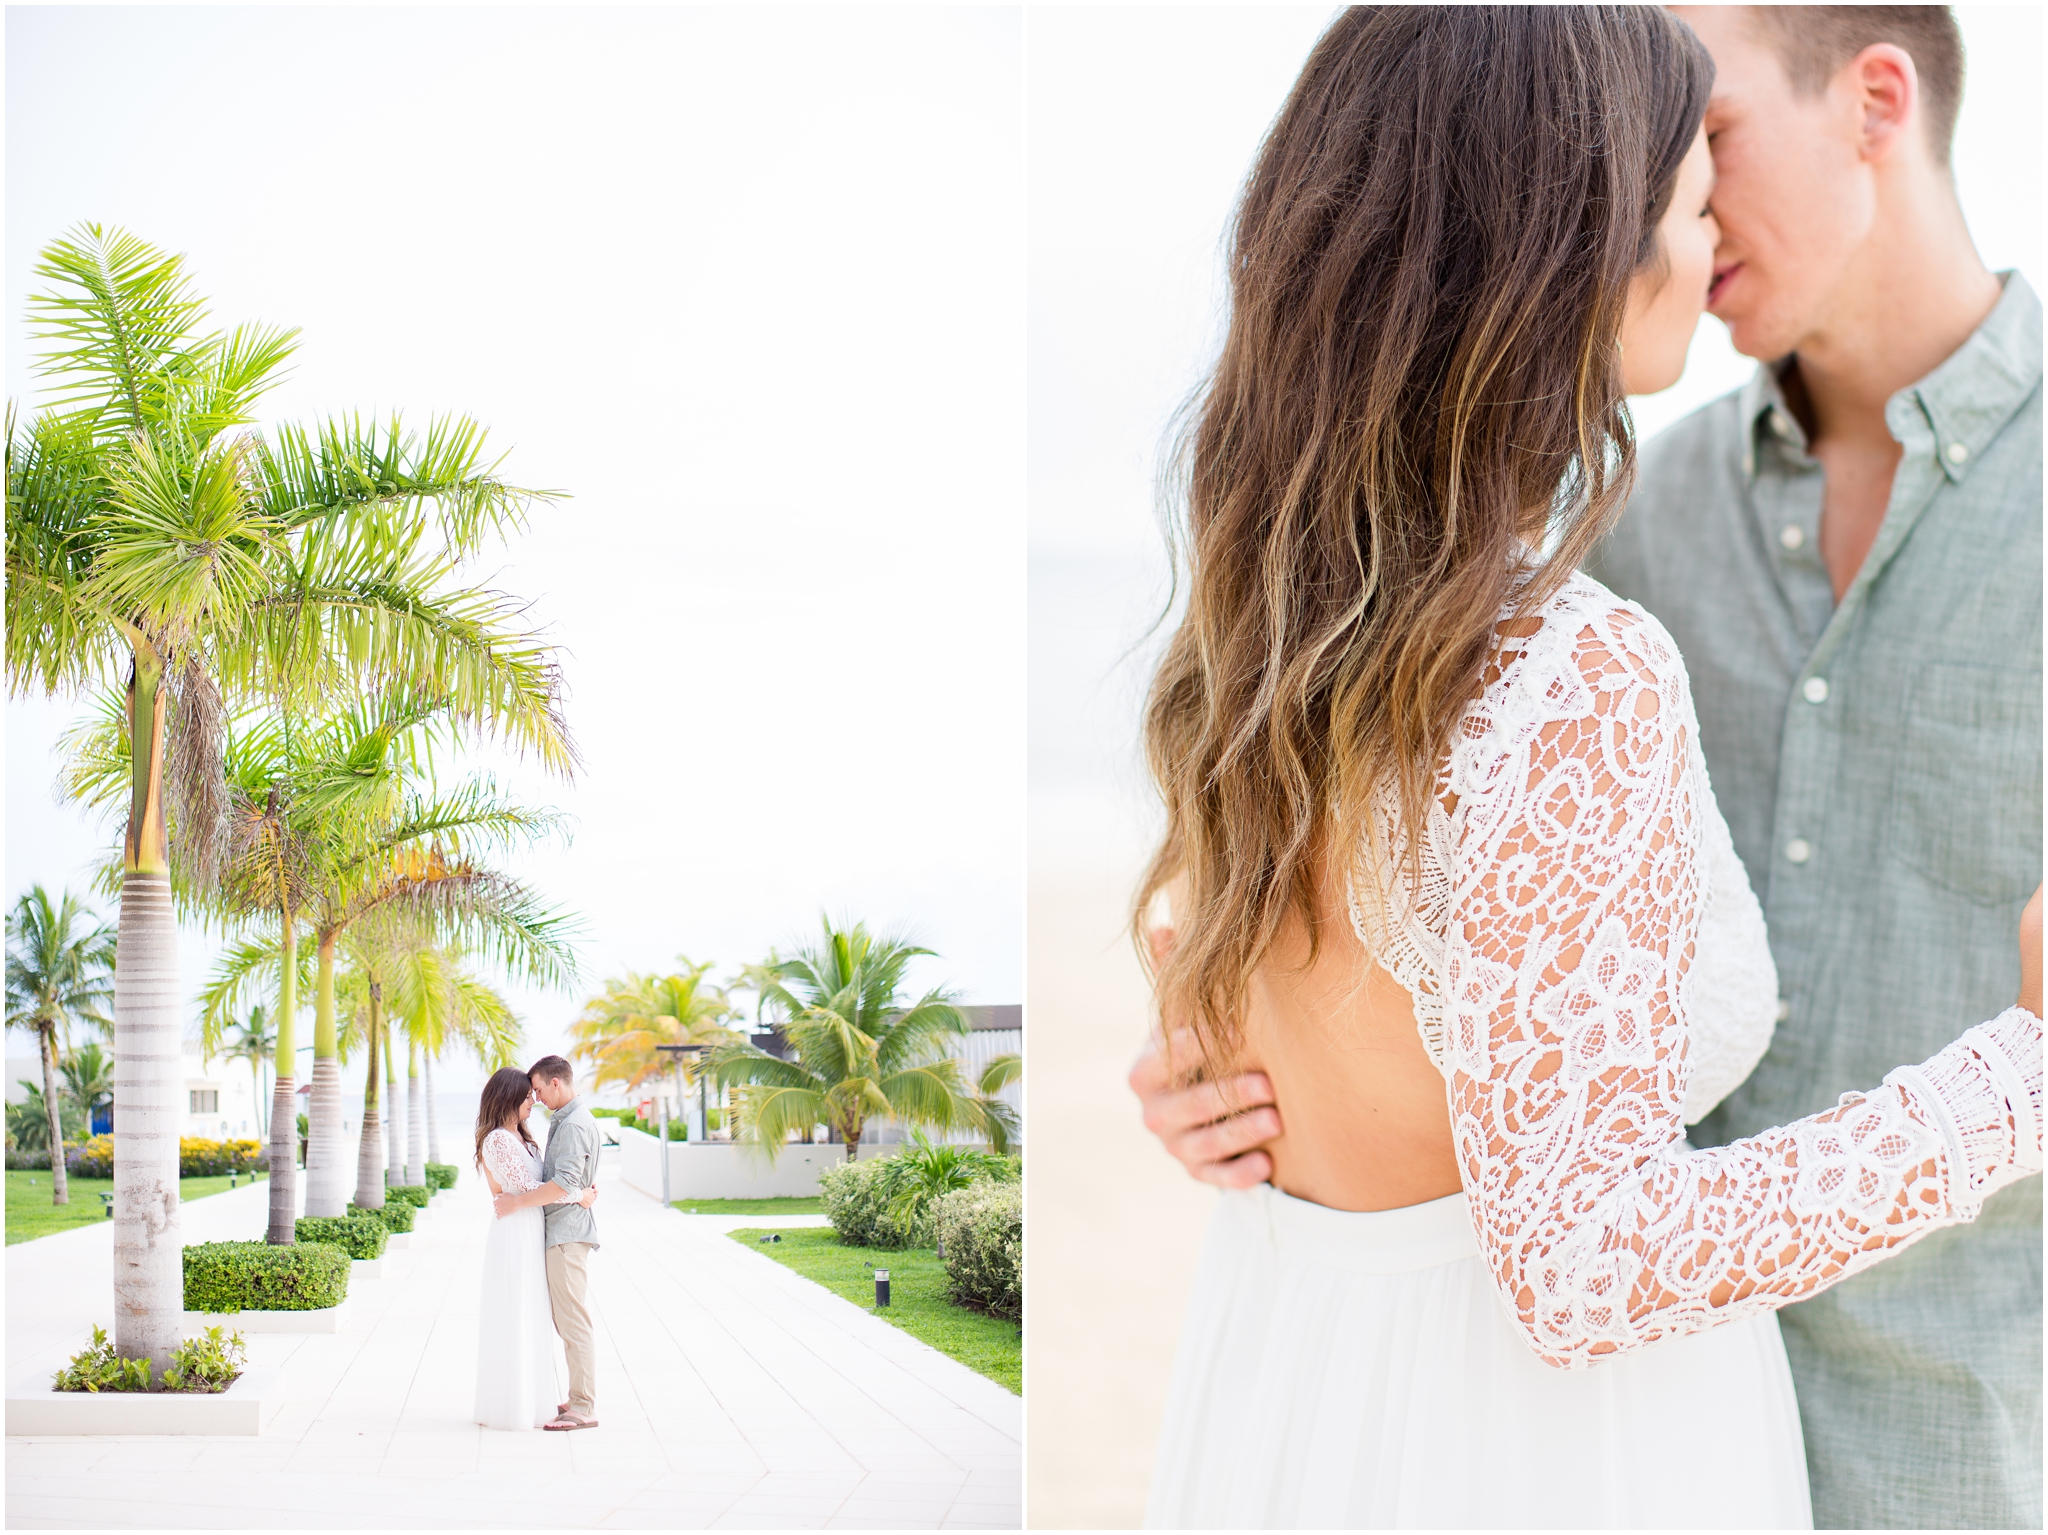 This Montego Bay Engagement Session was captured by Montego Bay Wedding Photographer Taylor Rose Photography at the Royalton Blue Waters resort in Montego Bay, Jamaica. The session took place the morning before Nik and Angela’s Montego Bay Wedding. Taylor is a Jamaica Destination Wedding Photographer available for travel worldwide. Angela wore the Awaken My Love White Long Sleeve Lace Maxi Dress from Lulu’s as a tropical dress for their tropical engagement session.